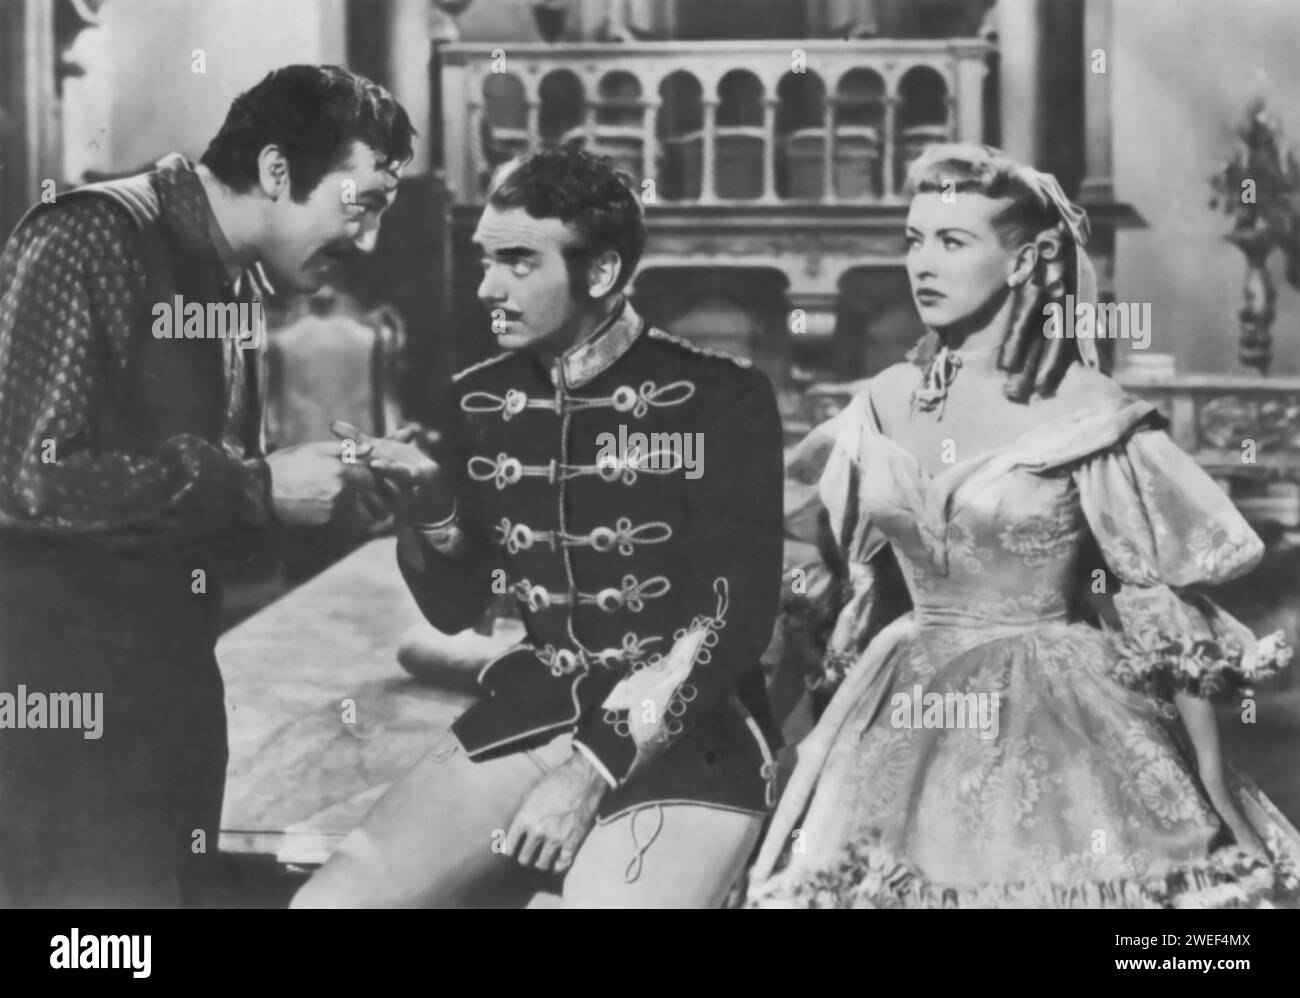 Cesar Romero, Douglas Fairbanks Jr., and Betty Grable star in 'That Lady in Ermine' (1948), a musical comedy. In this film, Grable plays Francesca, the countess of an Italian town during World War II, who is visited by the invading Hungarian army led by Fairbanks' character. Romero adds to the comedic elements of the plot. Stock Photo